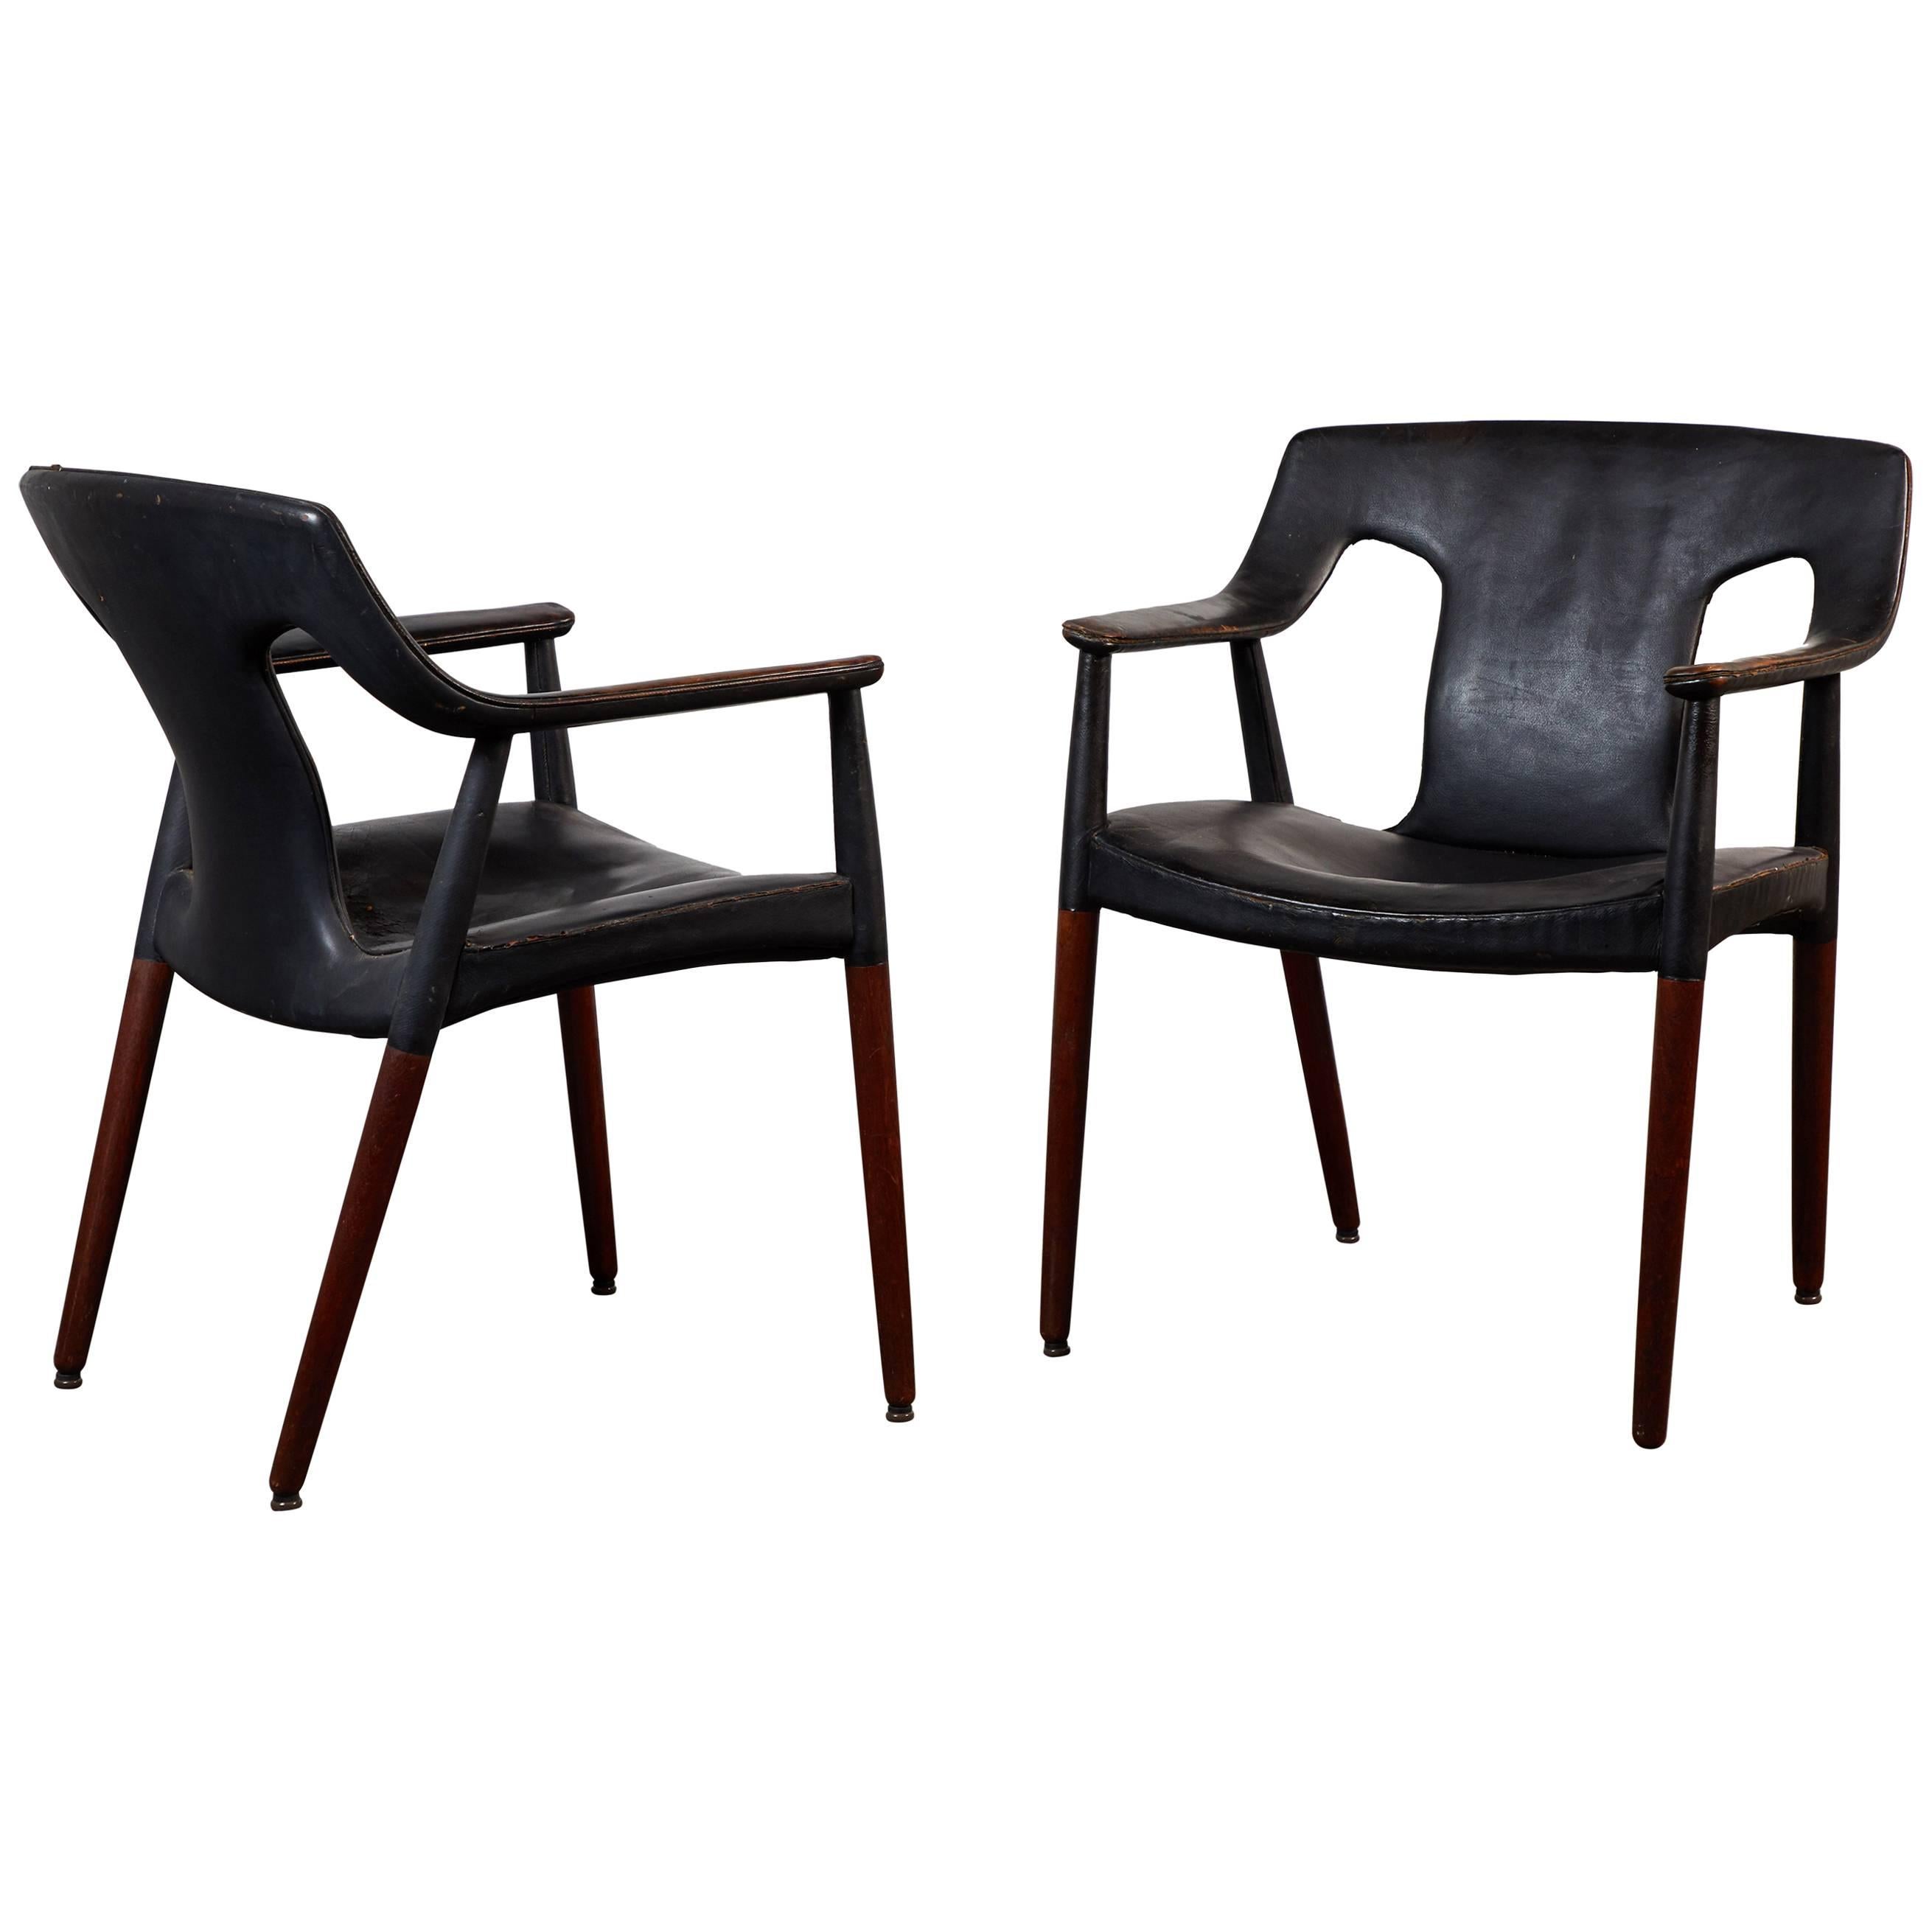 Pair of Leather Armchairs by Aksel Bender Madsen and Ejner Larsen